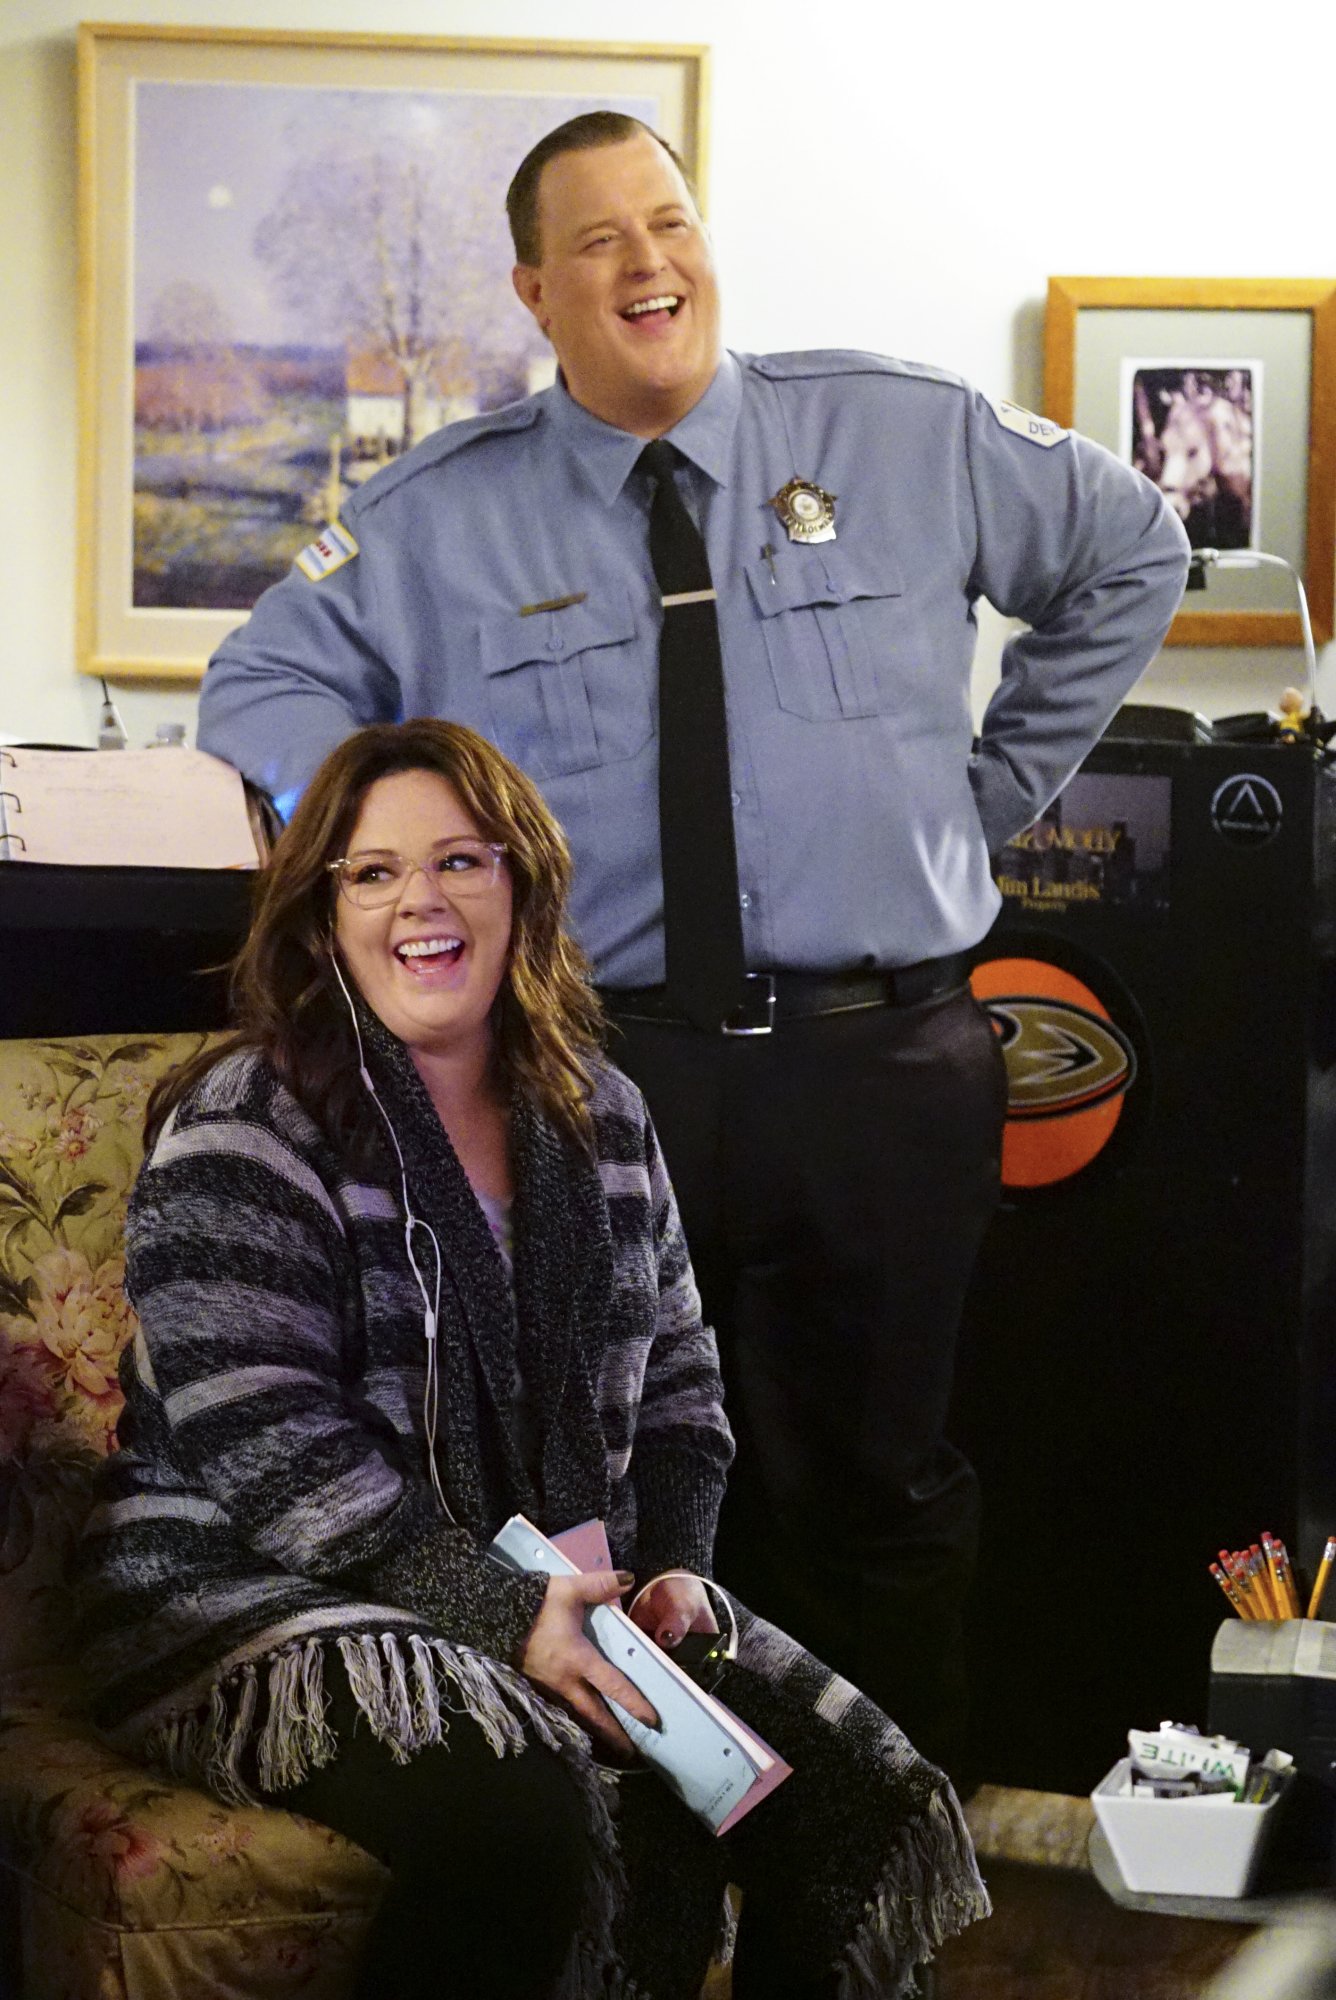 Billy Gardell as Mike and Melissa McCarthy as Molly on season 6 of "Mike & Molly." | Photo: Getty Images